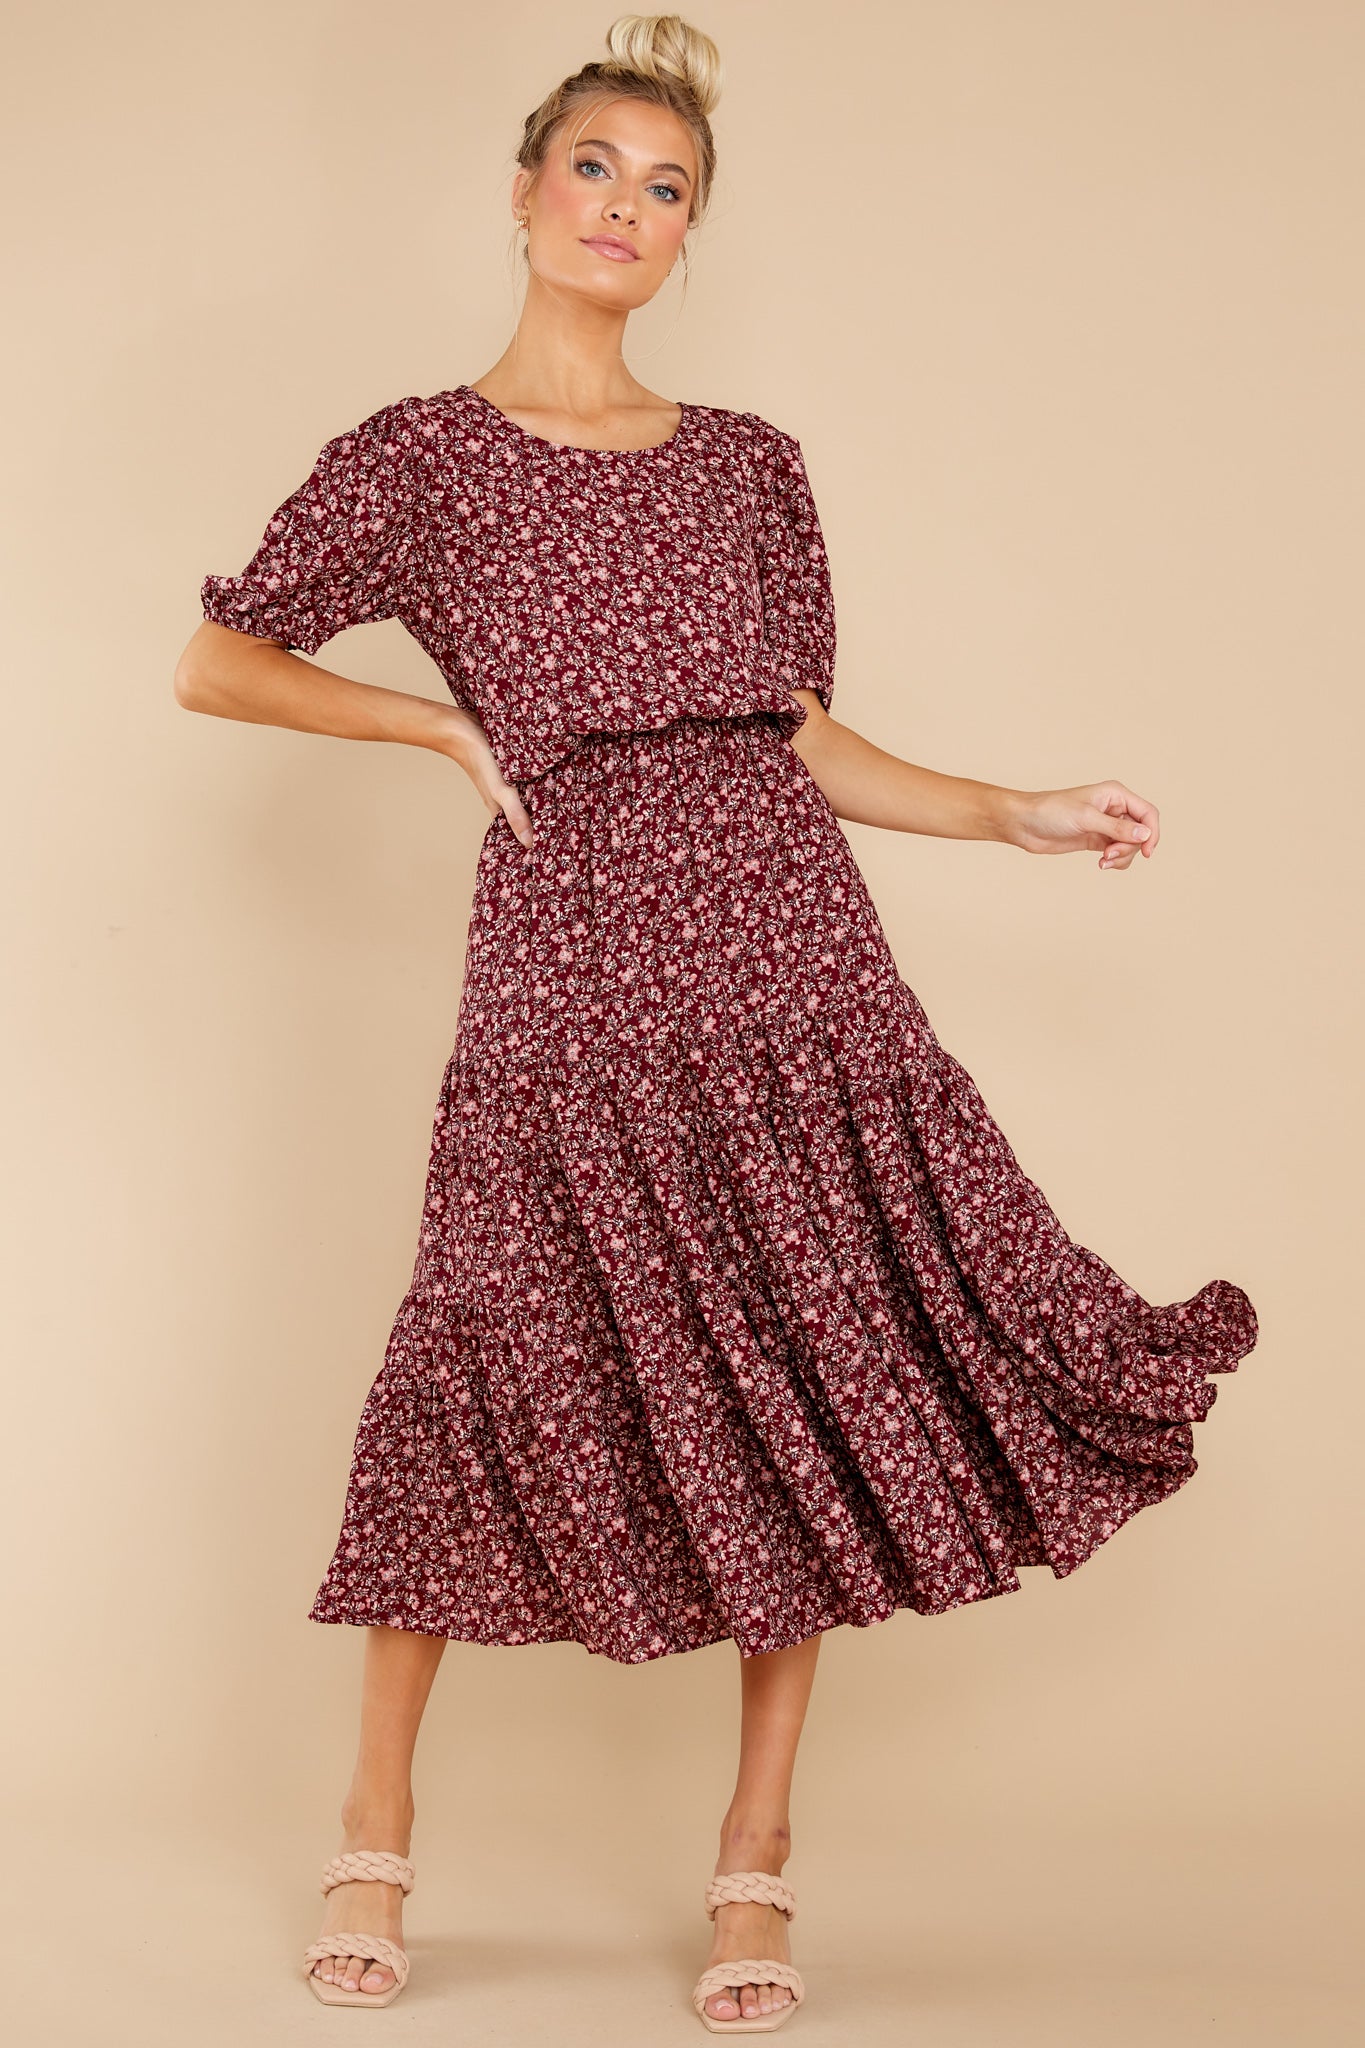 3 Most Certainly Yes Burgundy Floral Print Maxi Dress at reddress.com